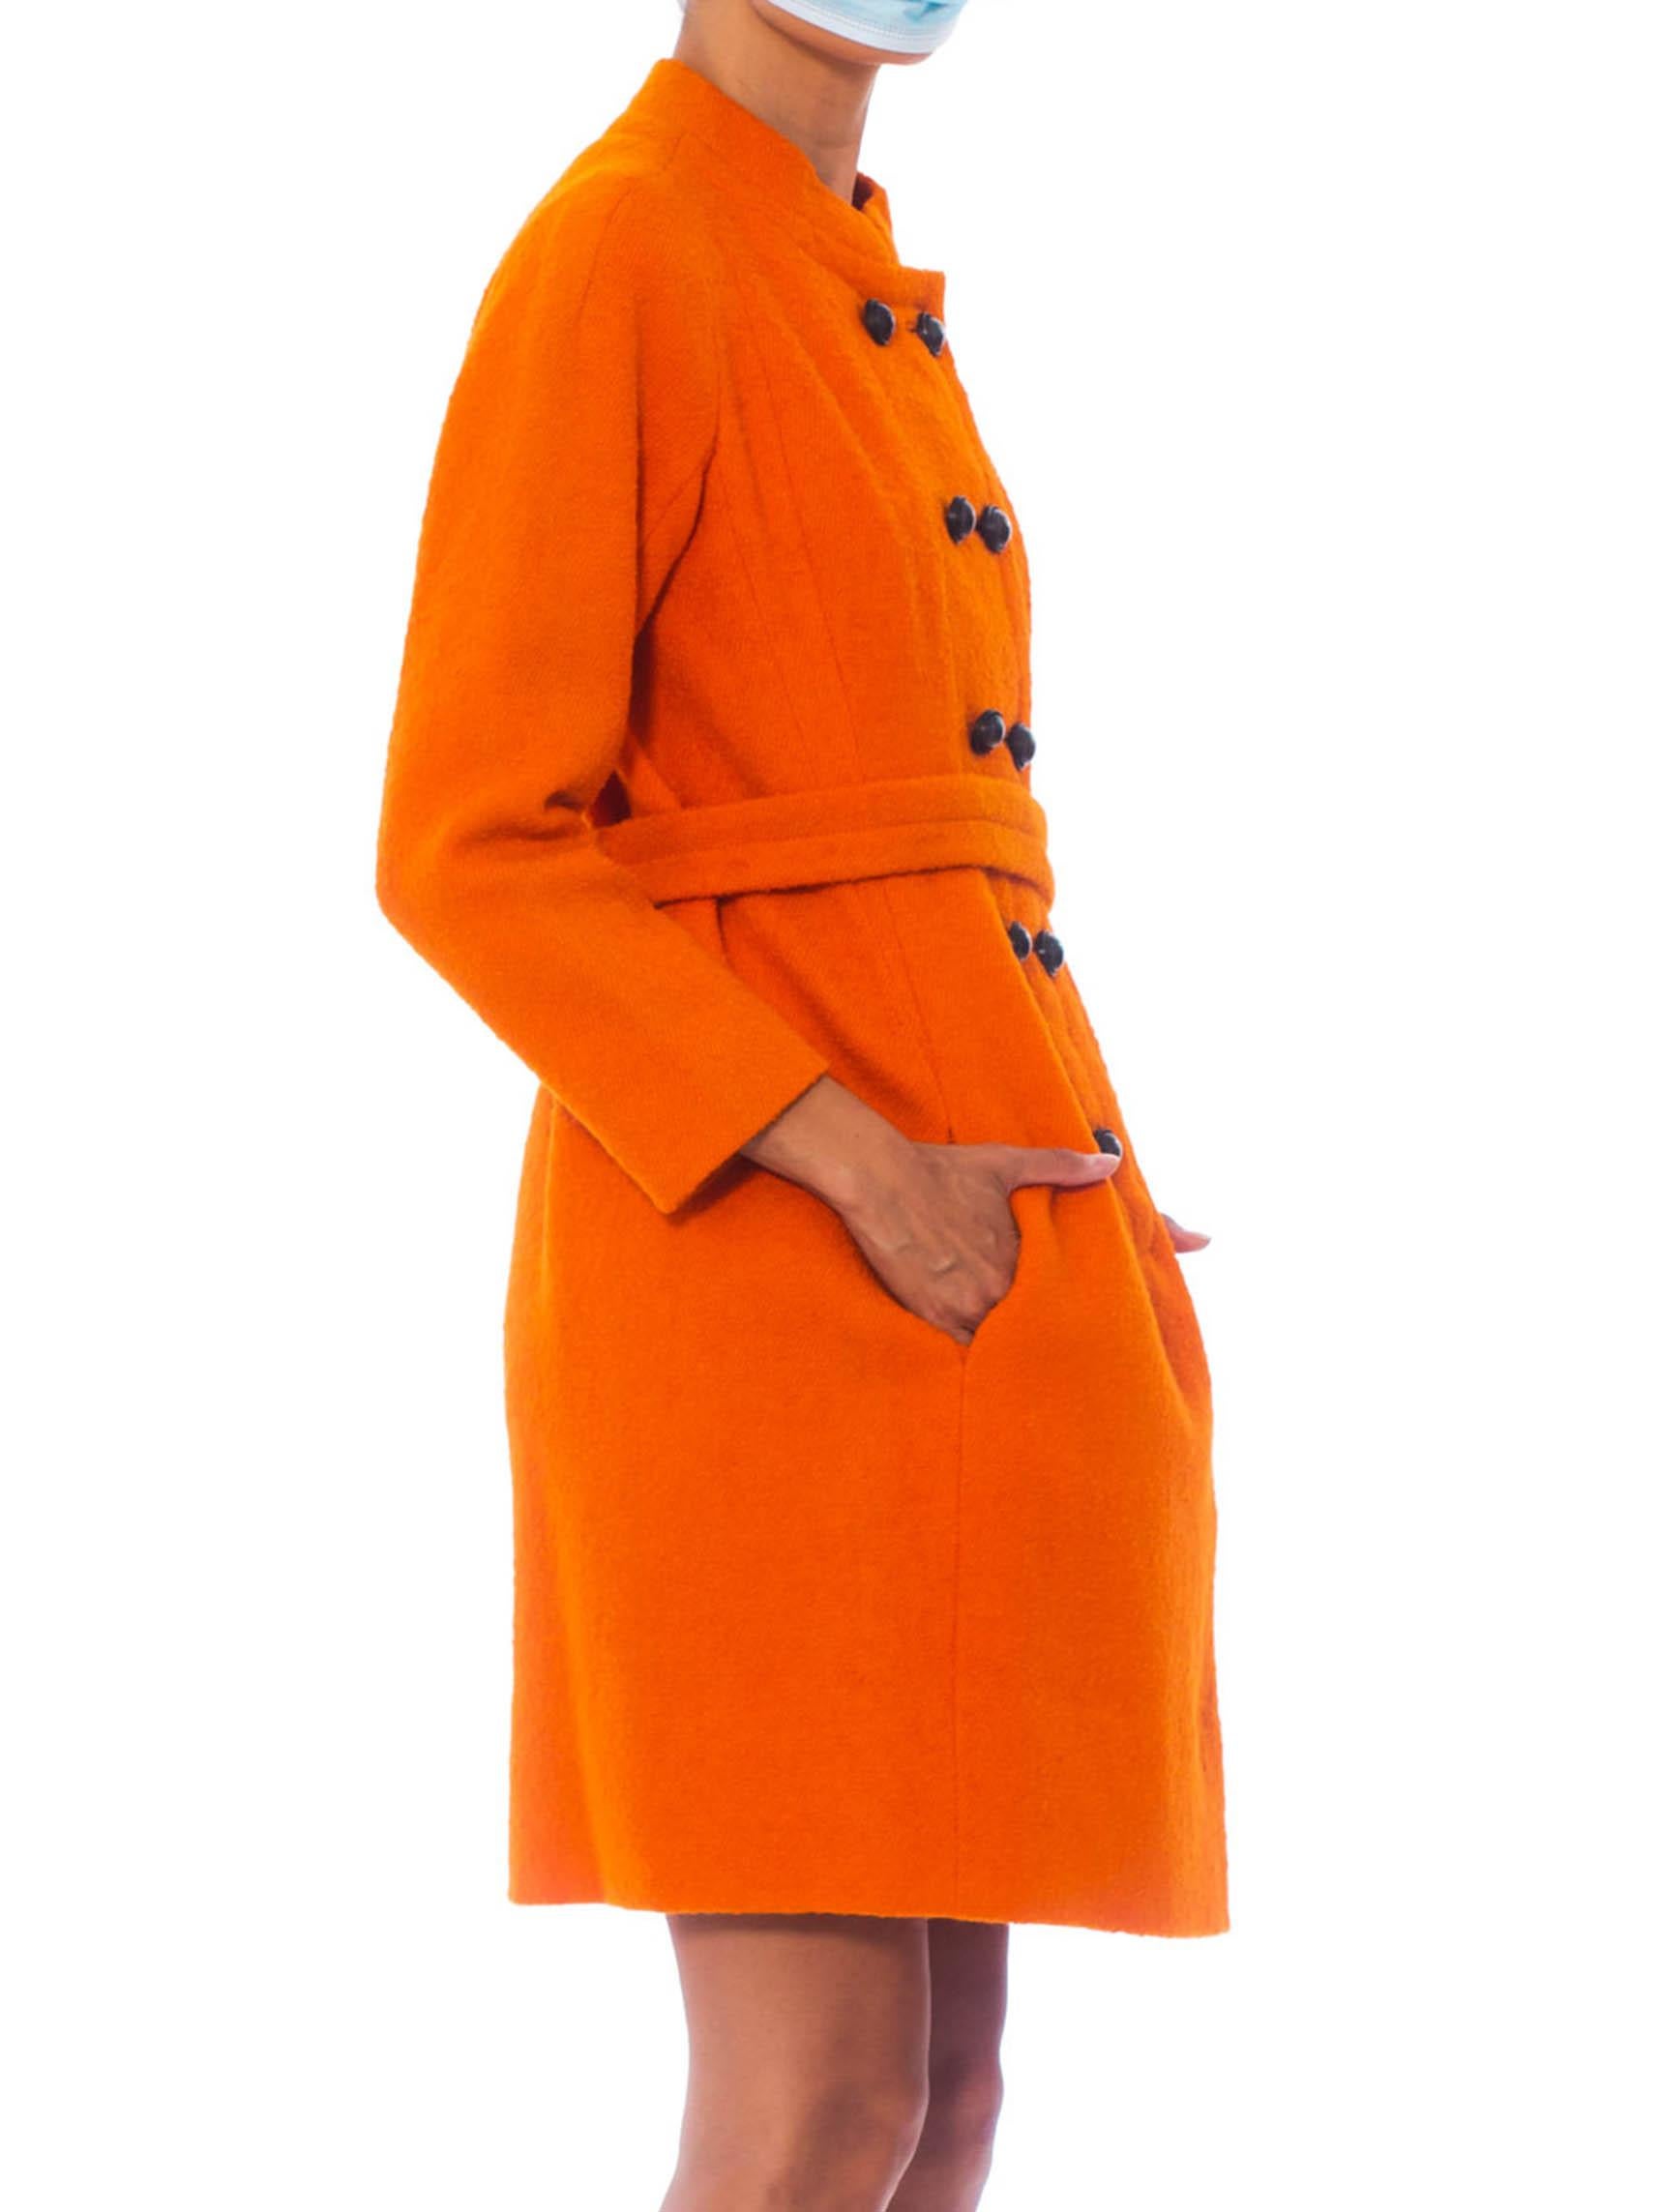 1960S GALANOS Orange Wool Boucle Mod Shift Dress Fully Lined In Silk With Pocke 2